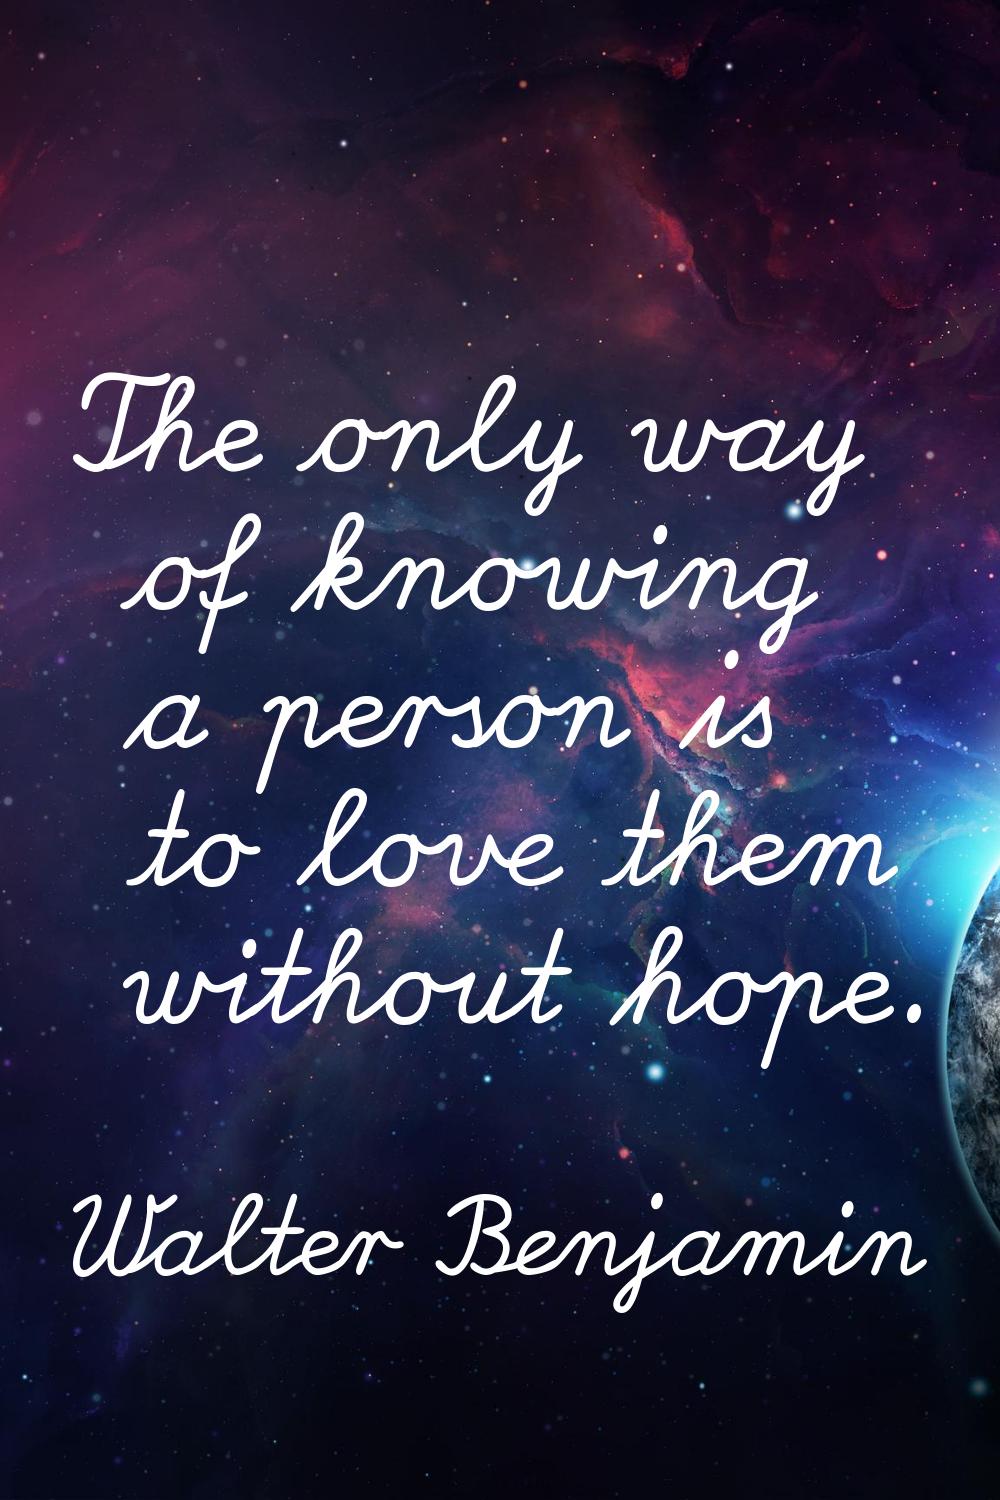 The only way of knowing a person is to love them without hope.